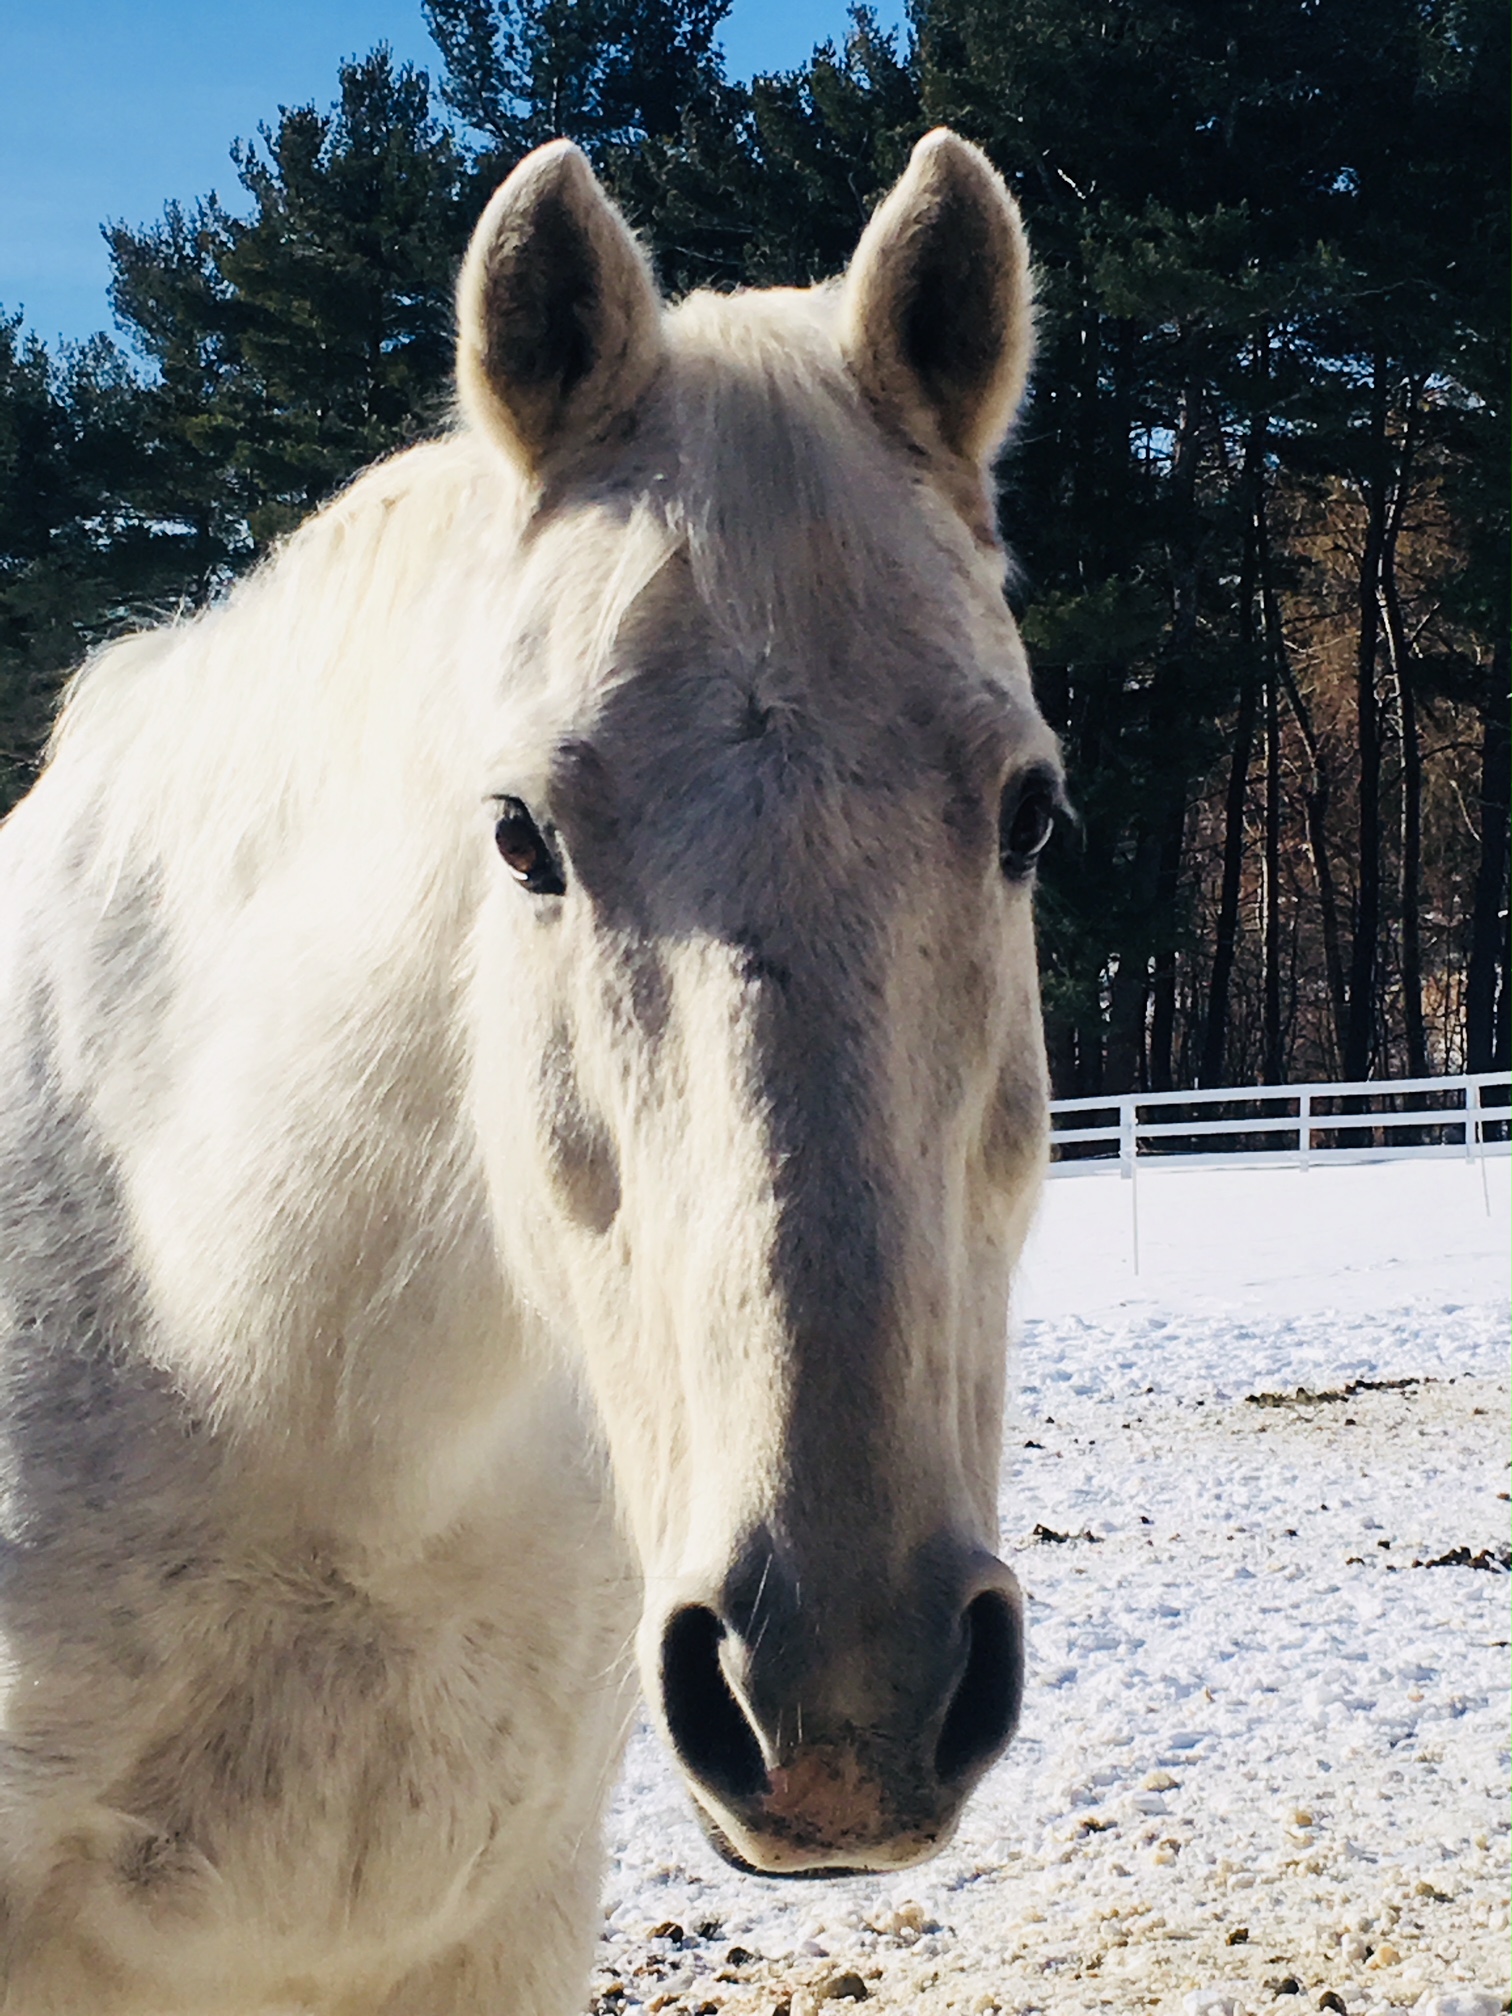 A close up of a white horse with his ears forward in a snowy field and white fence behind with pine trees in the background